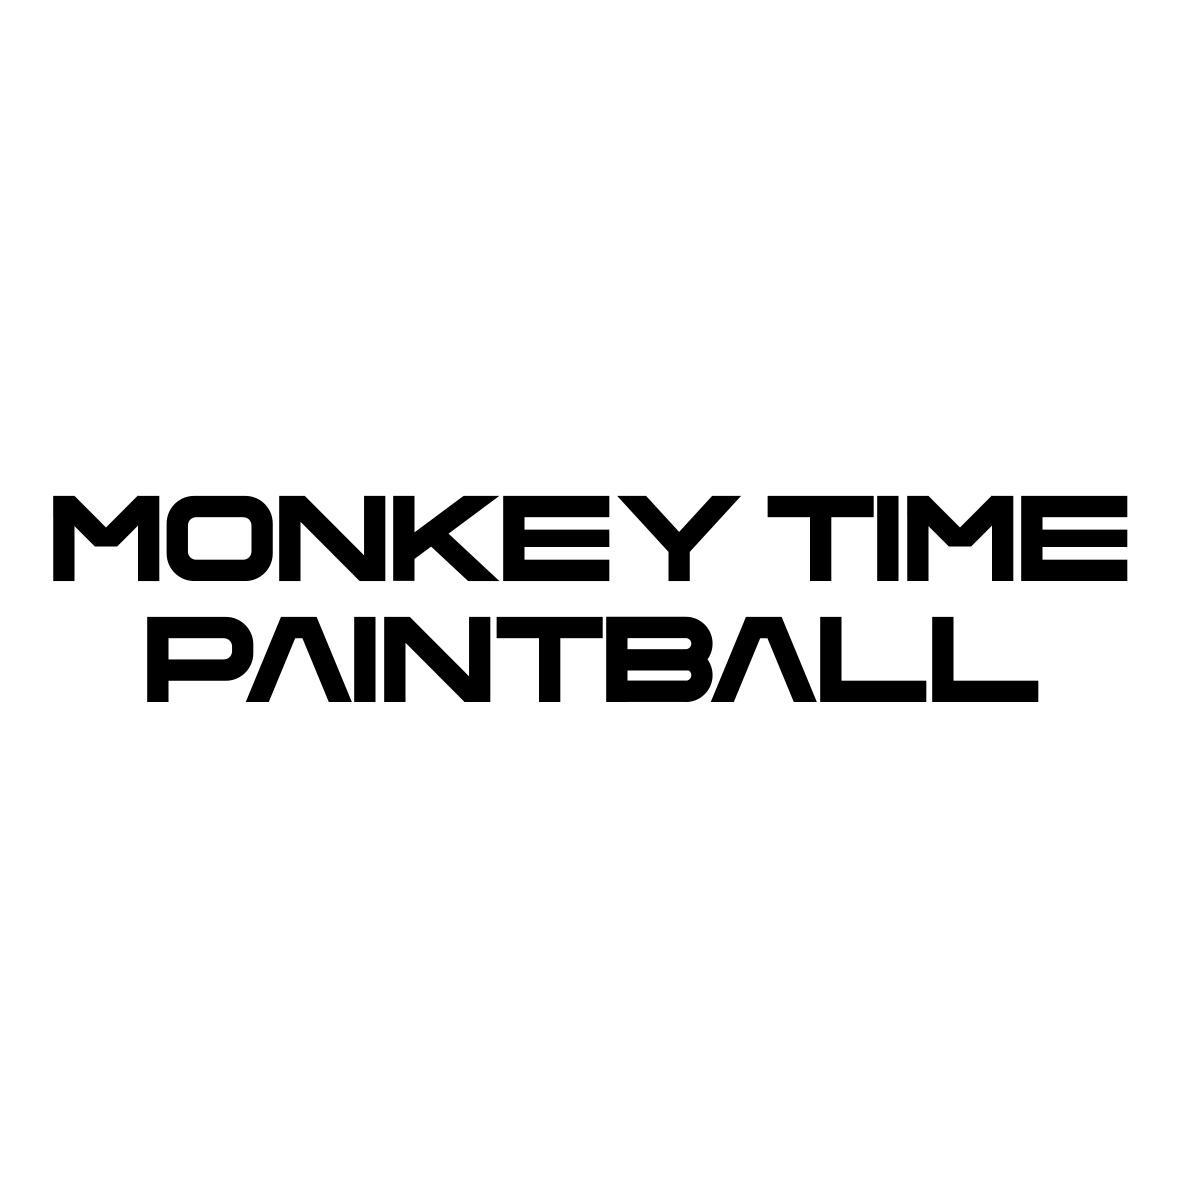 MONKEY TIME PAINTBALL